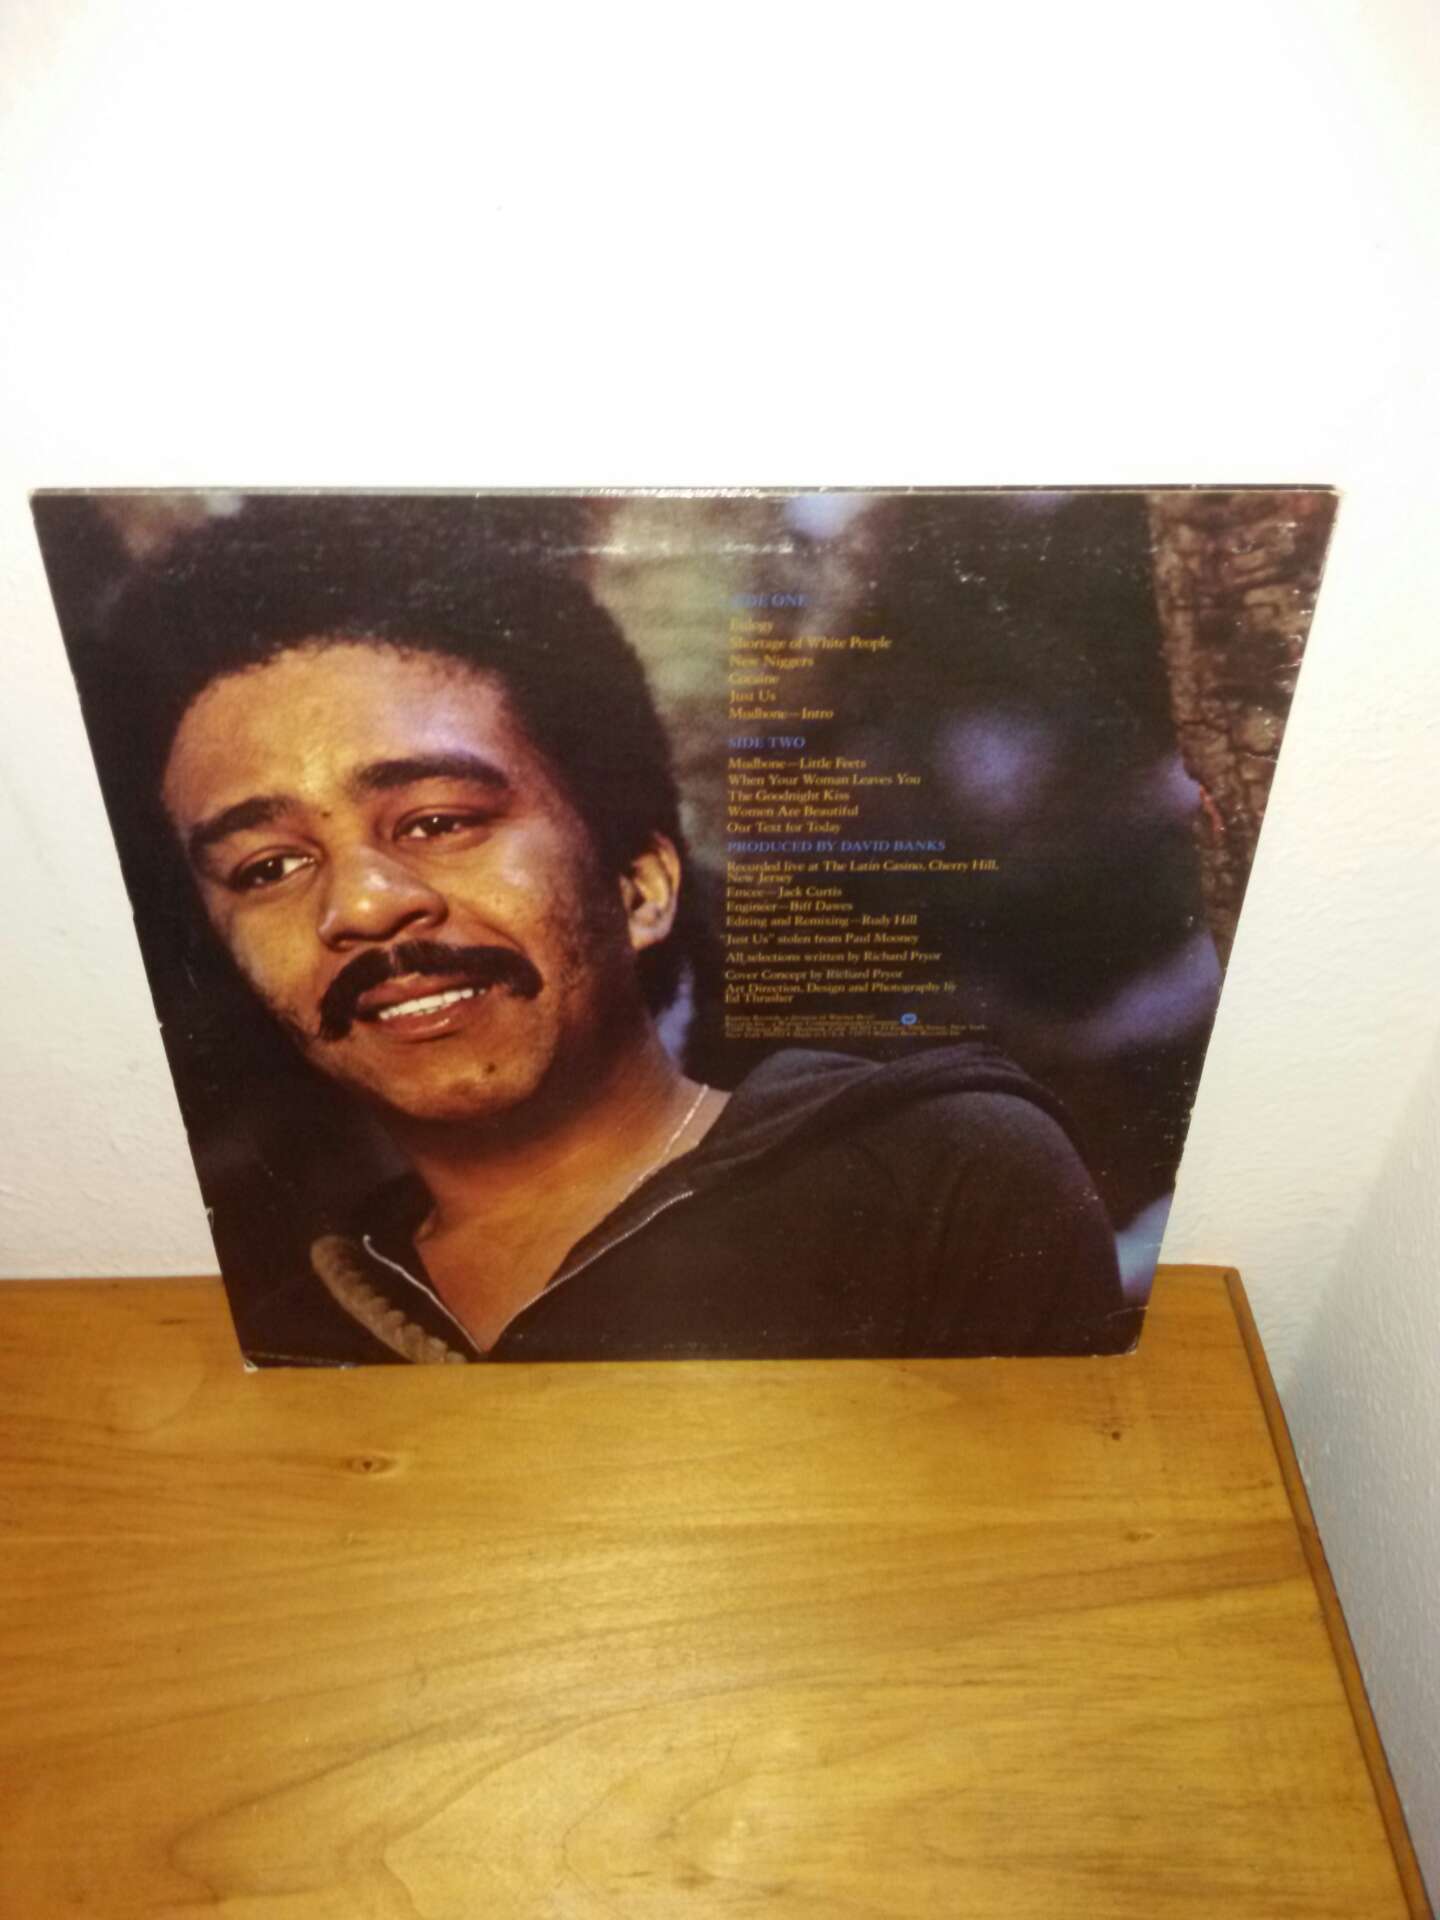 Two Richard Pryor albums..mint condition. for sale in Dallas, TX